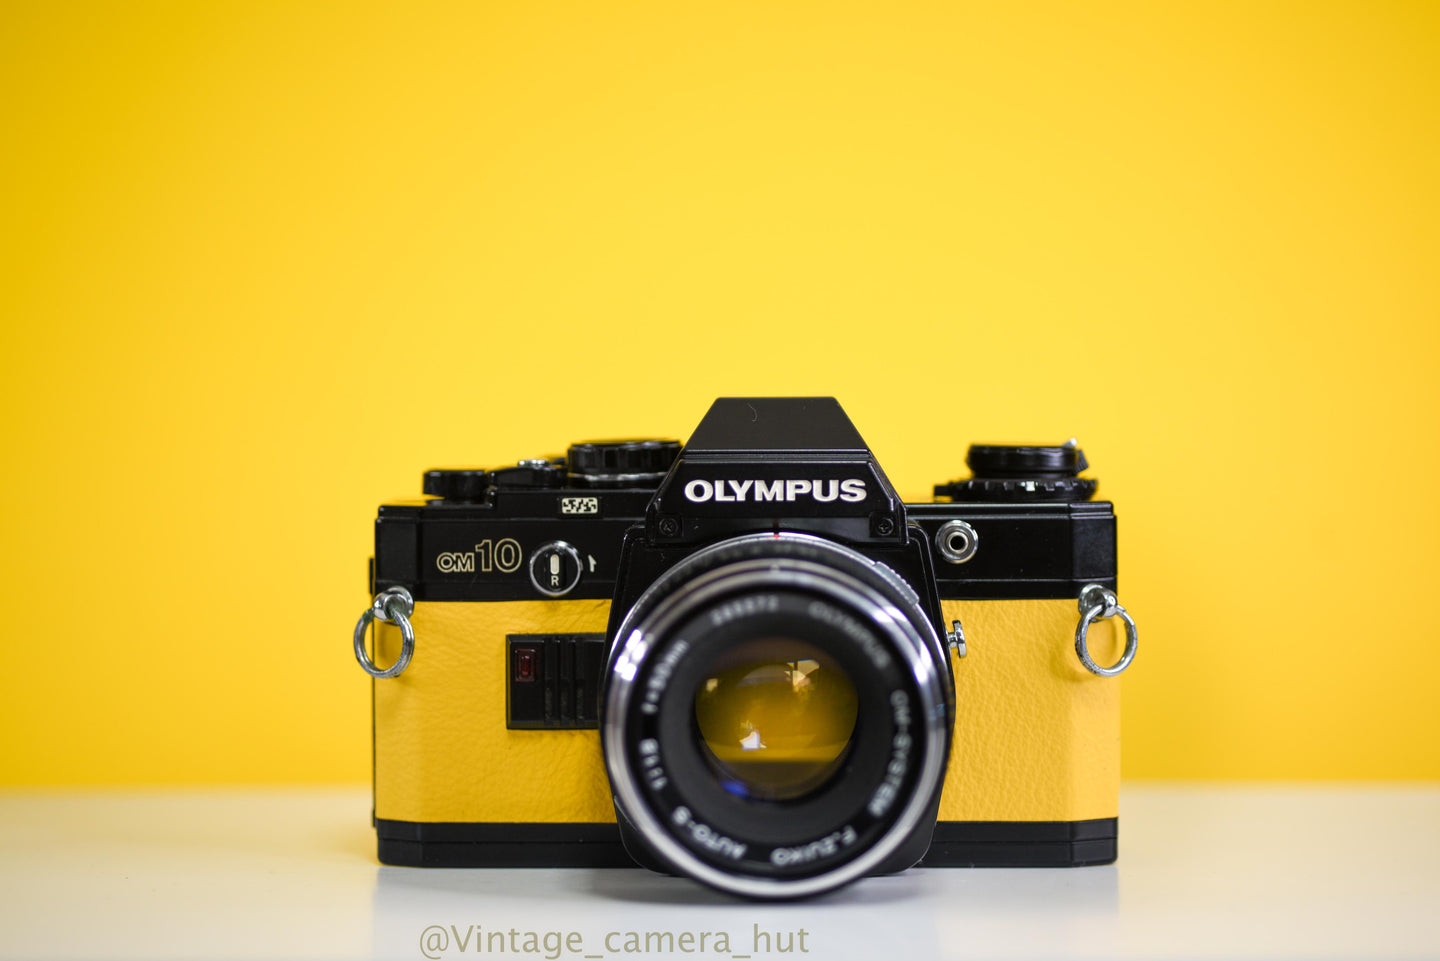 Olympus OM10 SLR Black Vintage 35mm Film Camera with Zuiko 50mm f/1.8 Prime Lens New Leather Yellow Skin